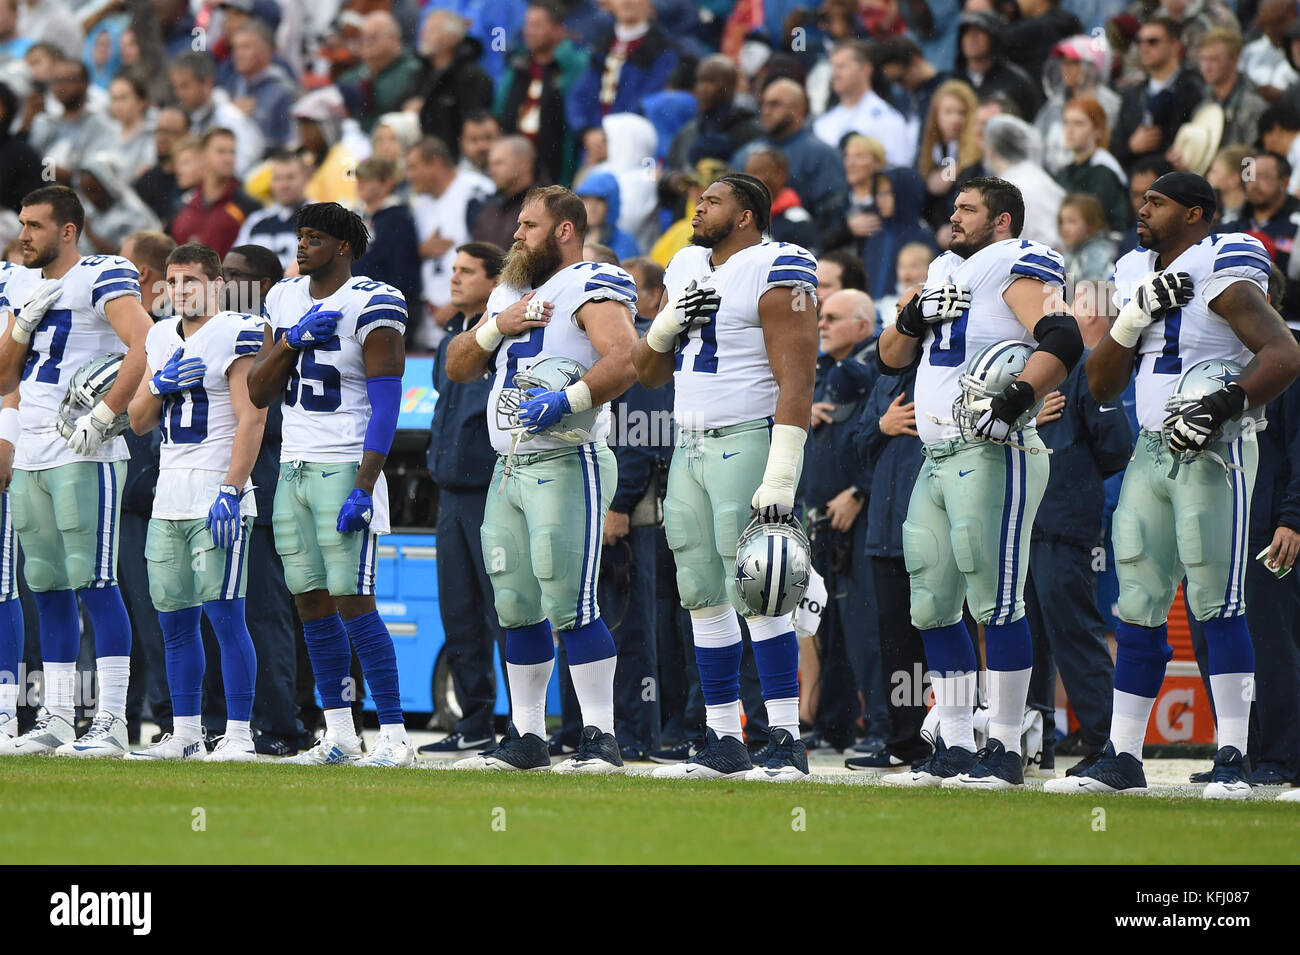 Landover, MD, USA. 29th Oct, 2017. Dallas Cowboy players stand at attention while the National Anthem is performed before the NFC divisional matchup between the Dallas Cowboys and the Washington Redskins at FedEx Field in Landover, MD. Credit: csm/Alamy Live News Stock Photo